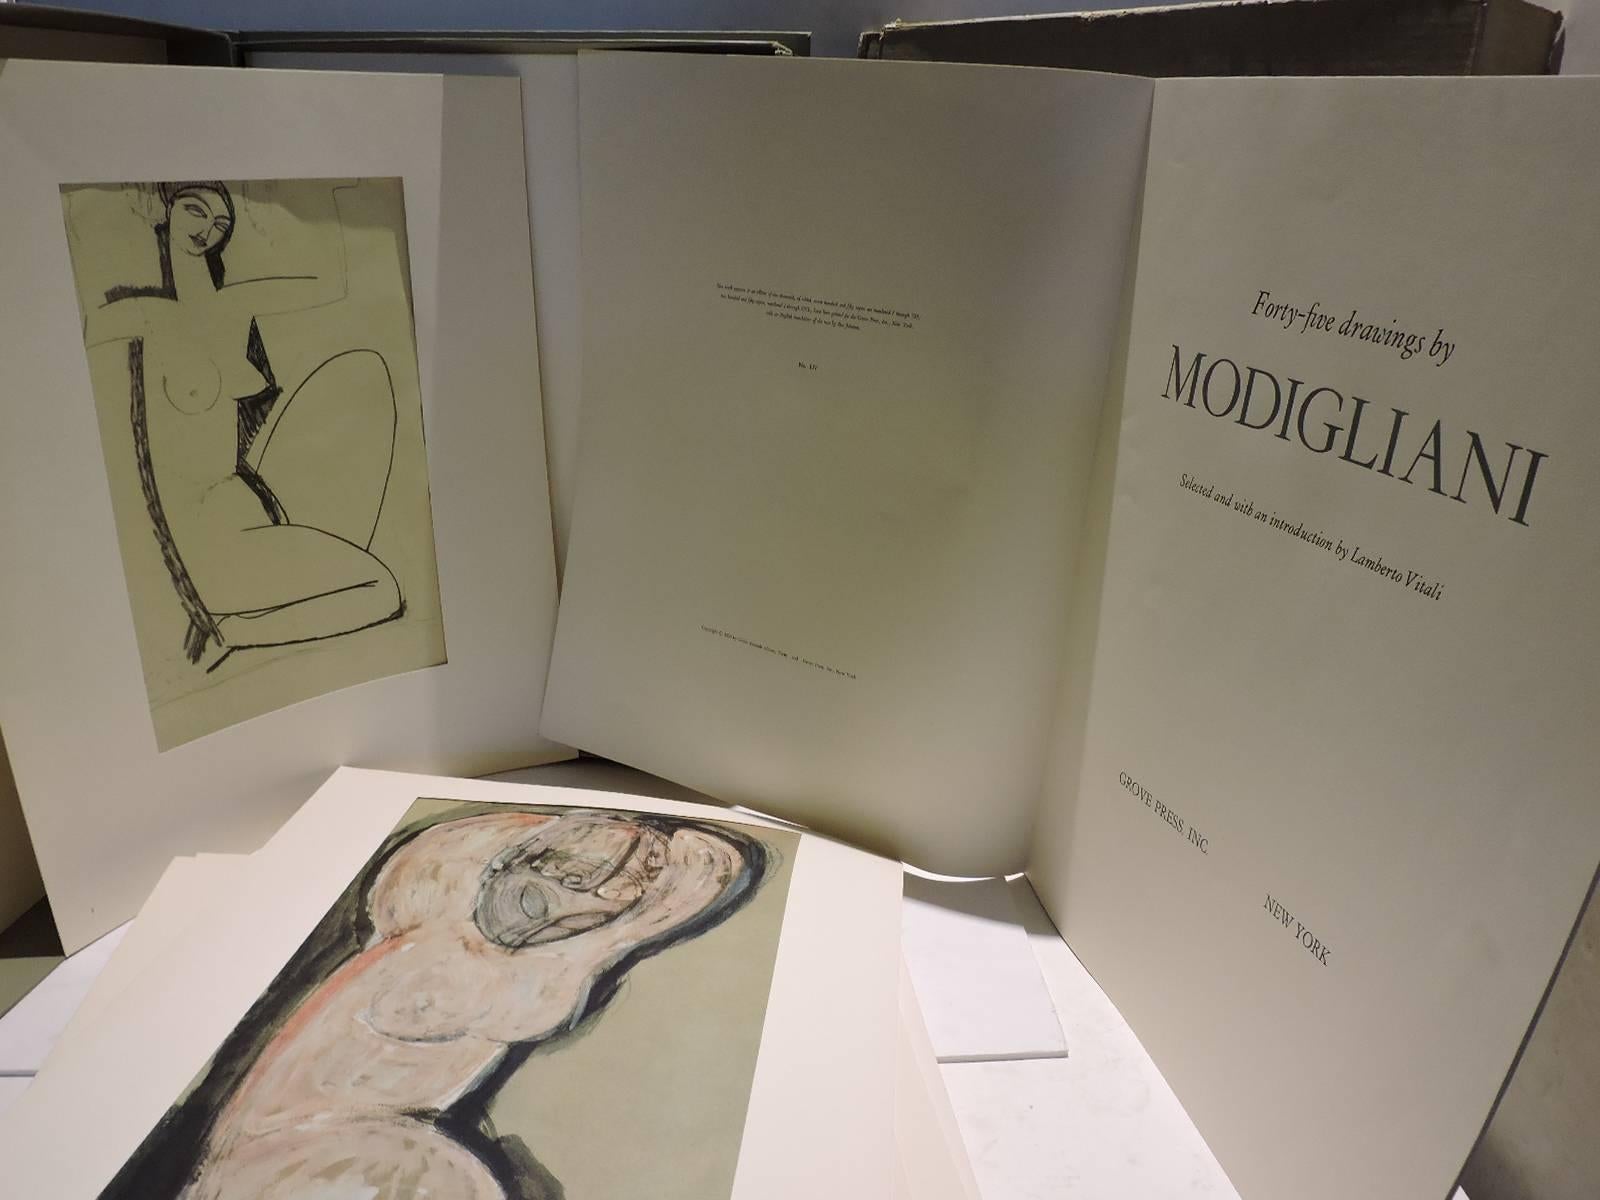 Forty-Five Drawings by Modigliani, Grove Press, Limited Edition Boxed Folio  4